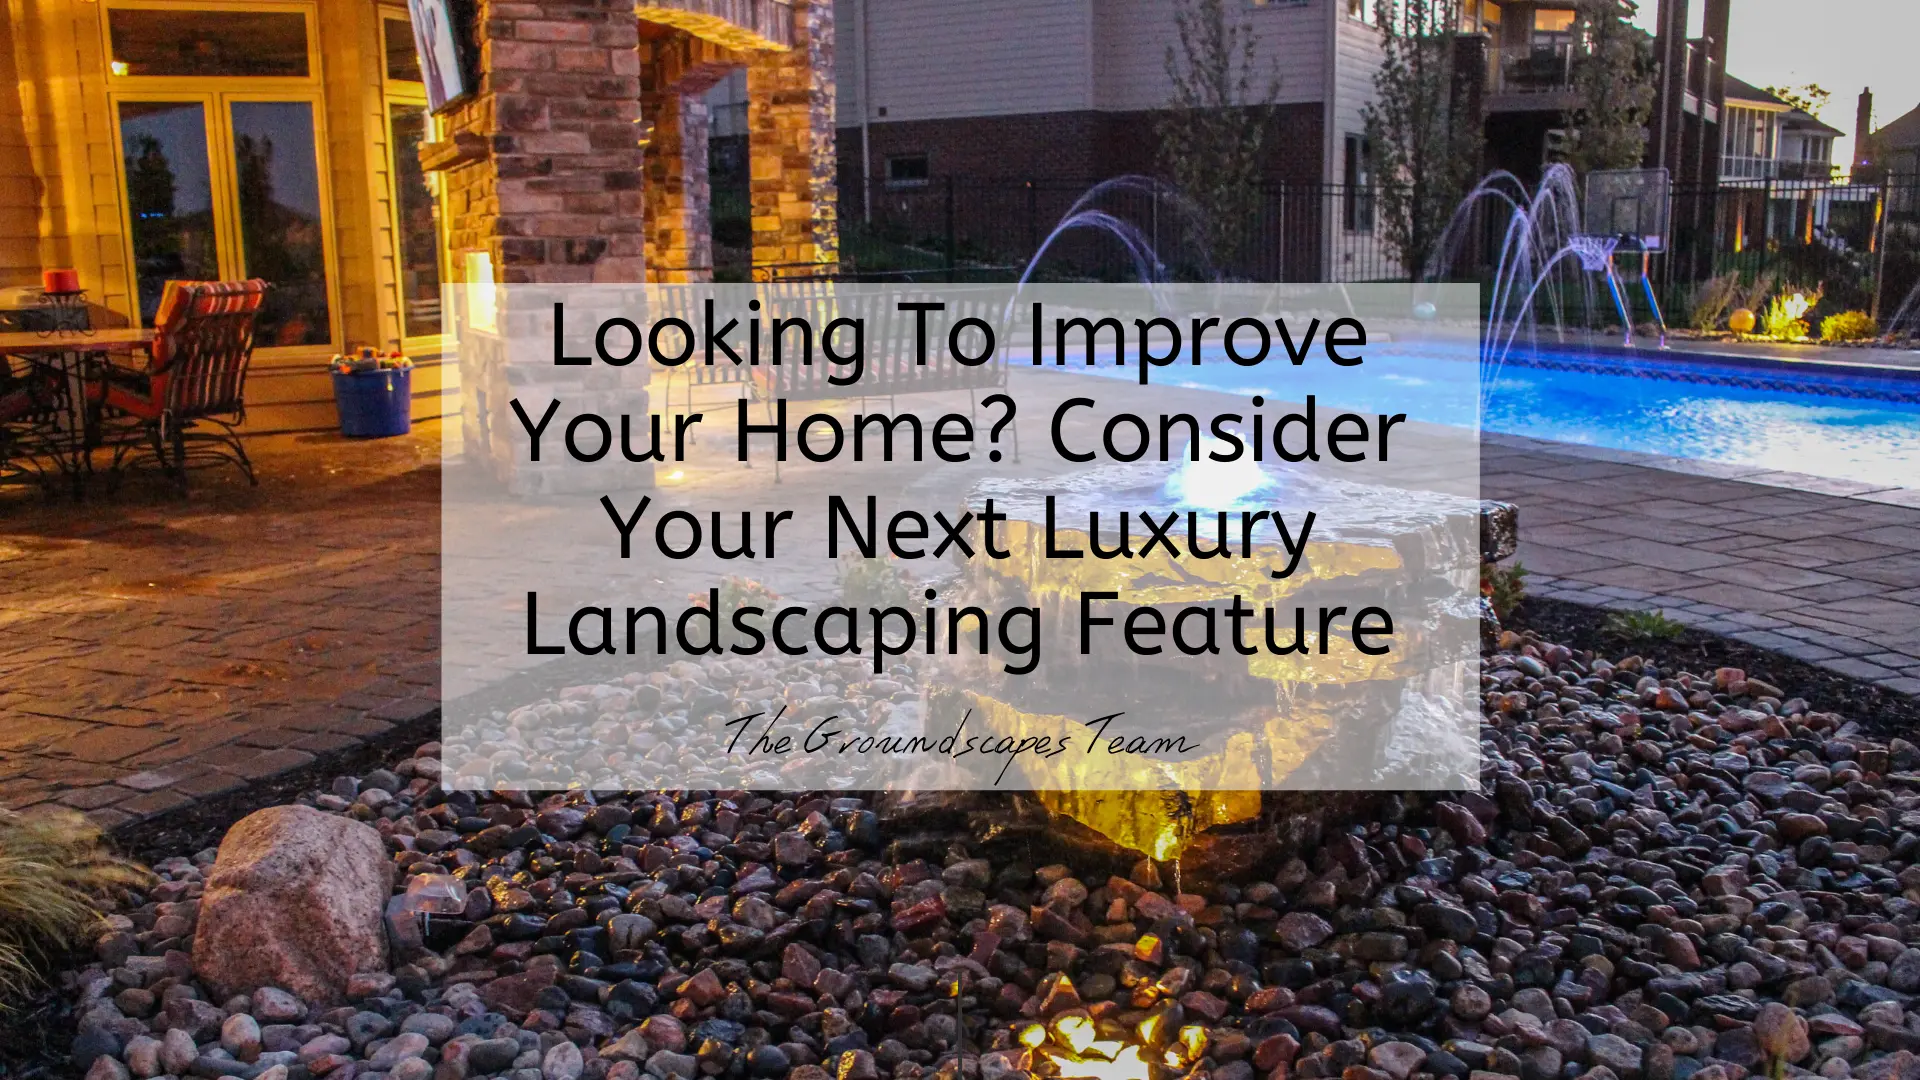 Looking to Improve Your Home? Consider Your Next Luxury Landscaping Feature!